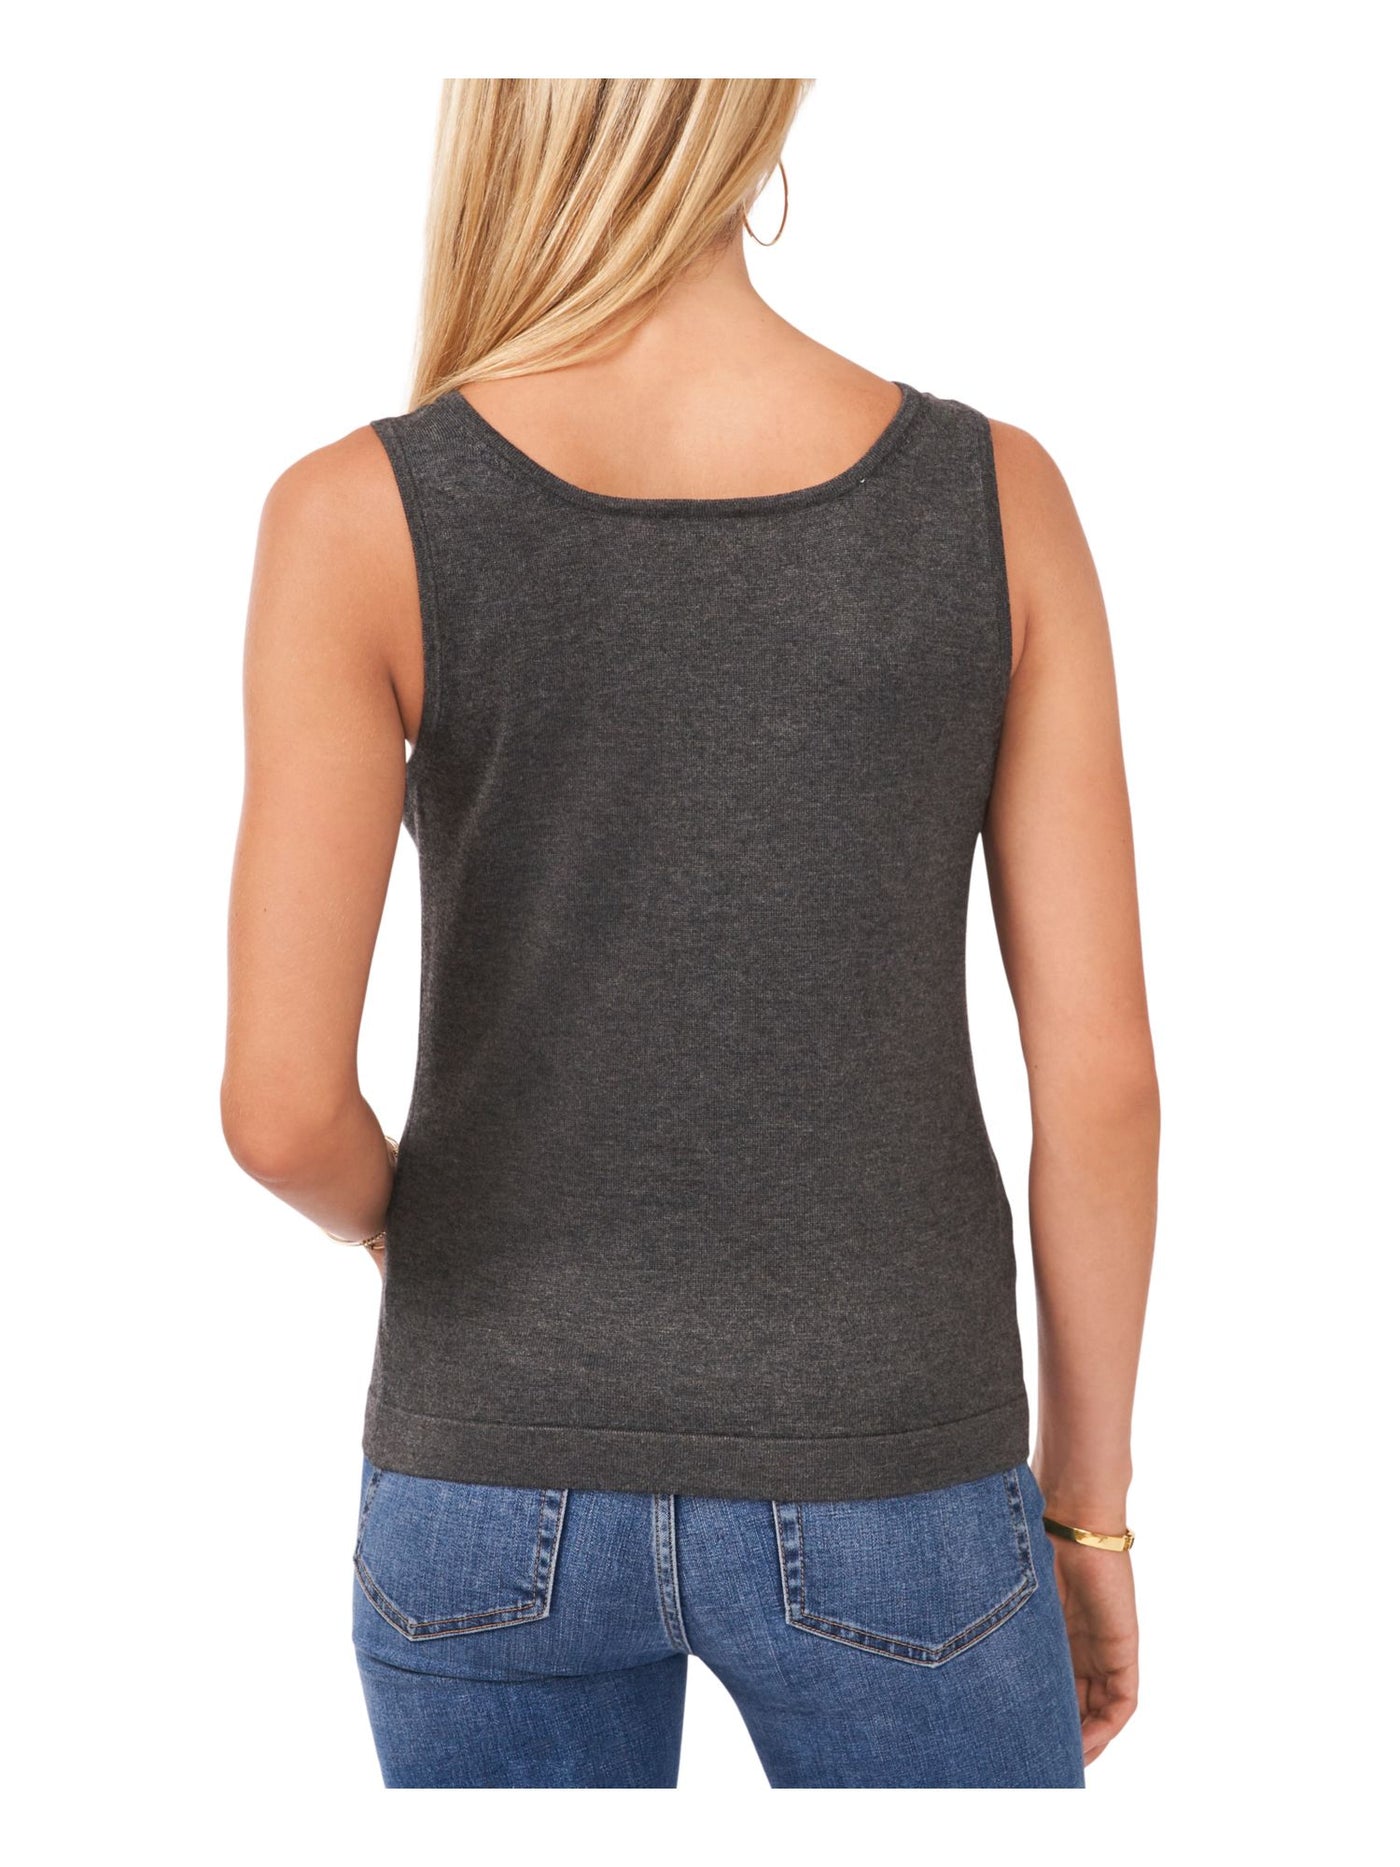 VINCE CAMUTO Womens Gray Ribbed Heather Sleeveless Scoop Neck Tank Top L